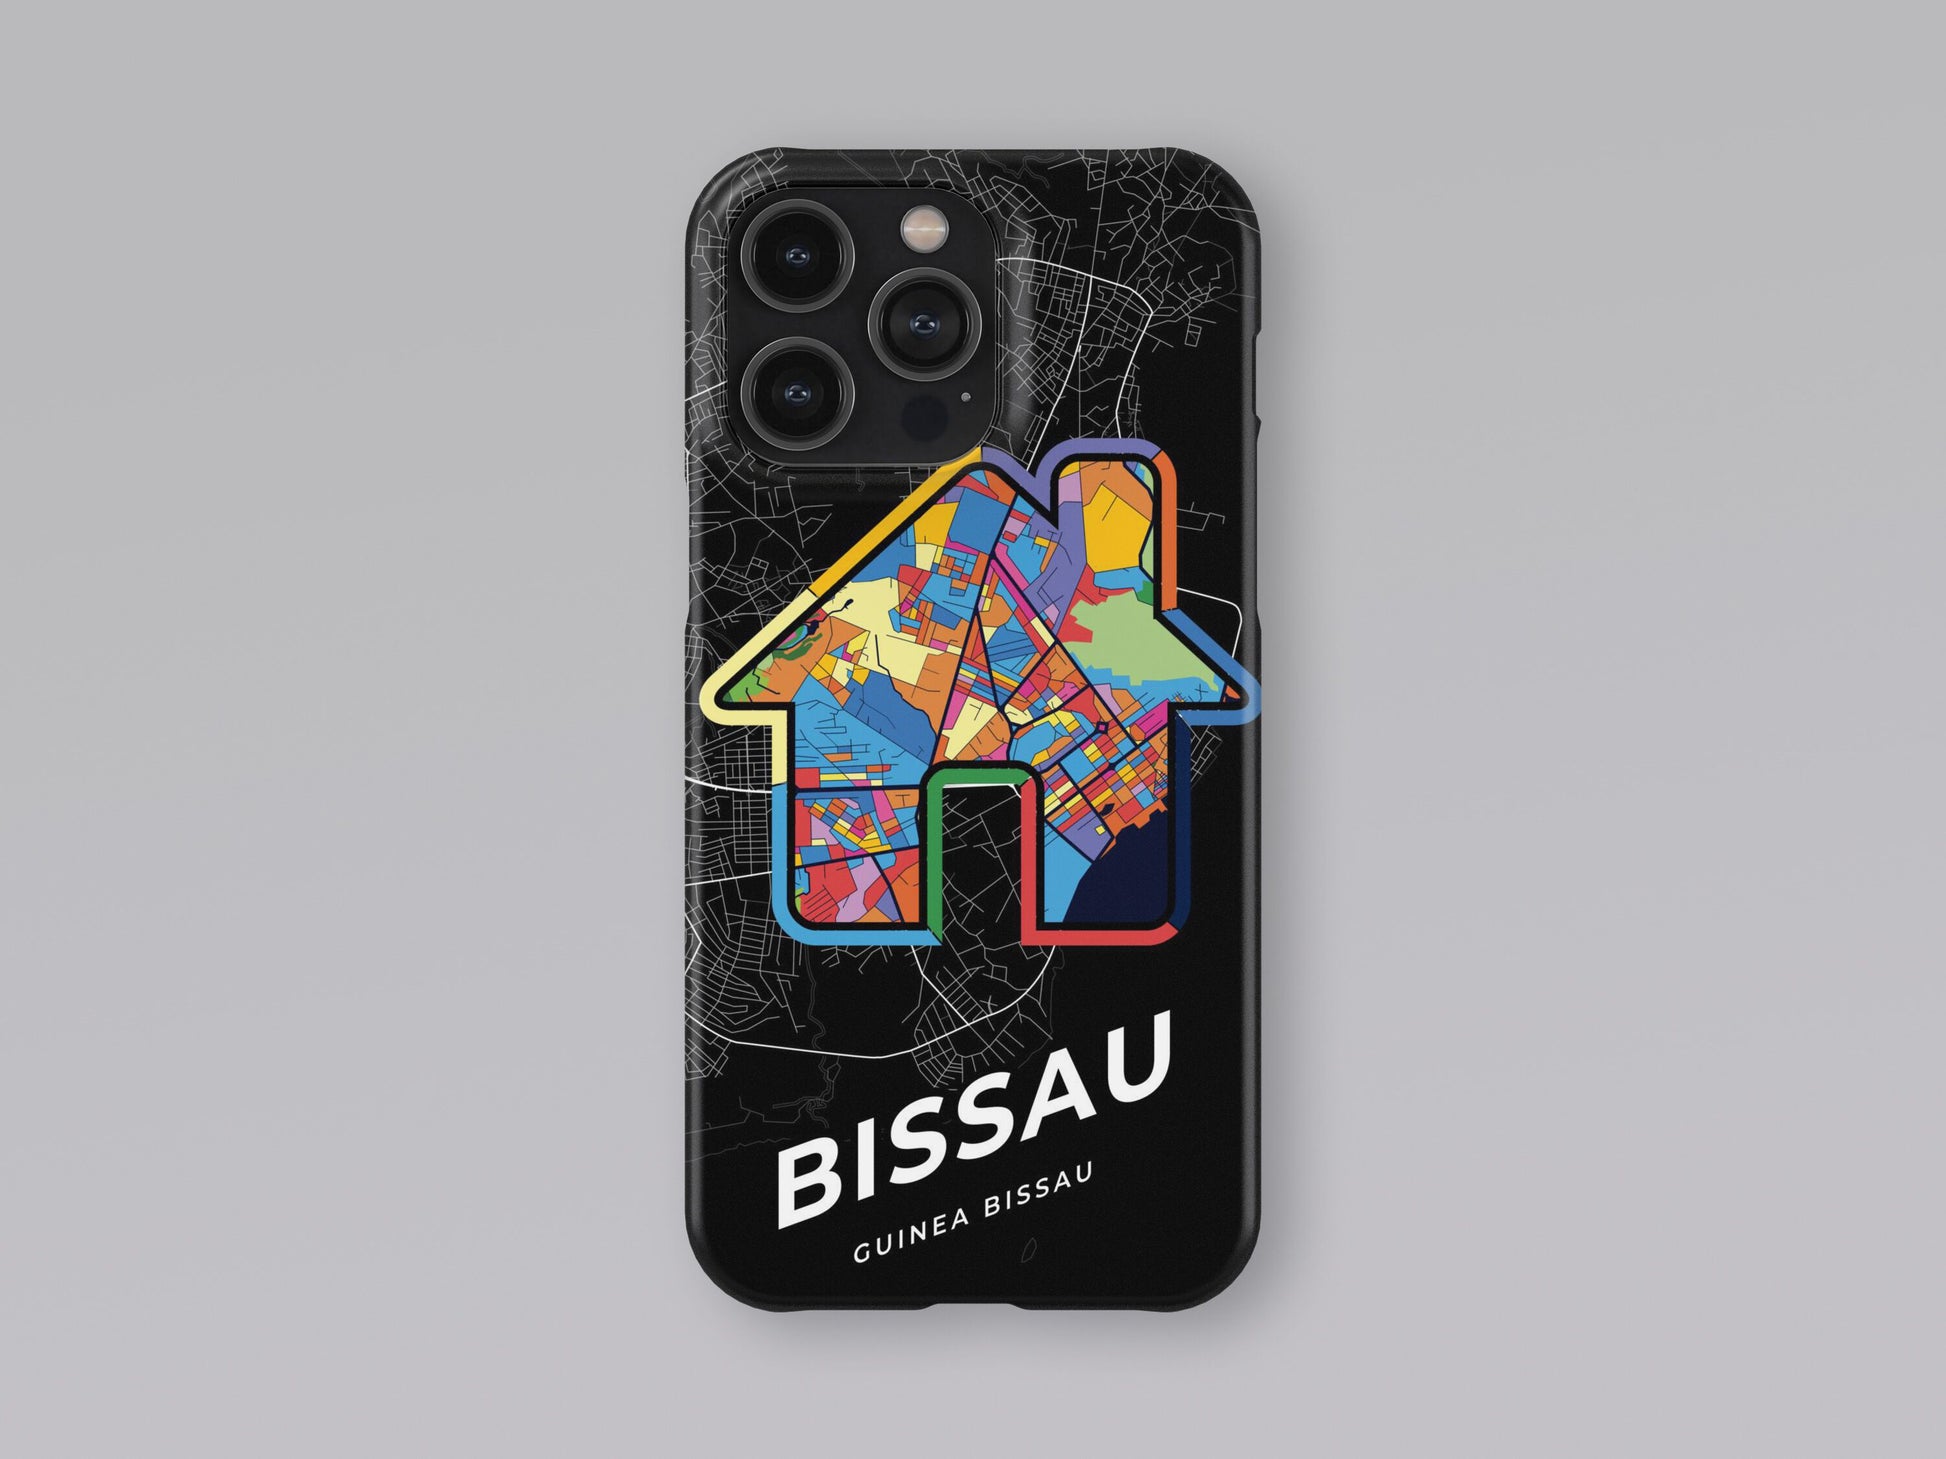 Bissau Guinea Bissau slim phone case with colorful icon. Birthday, wedding or housewarming gift. Couple match cases. 3